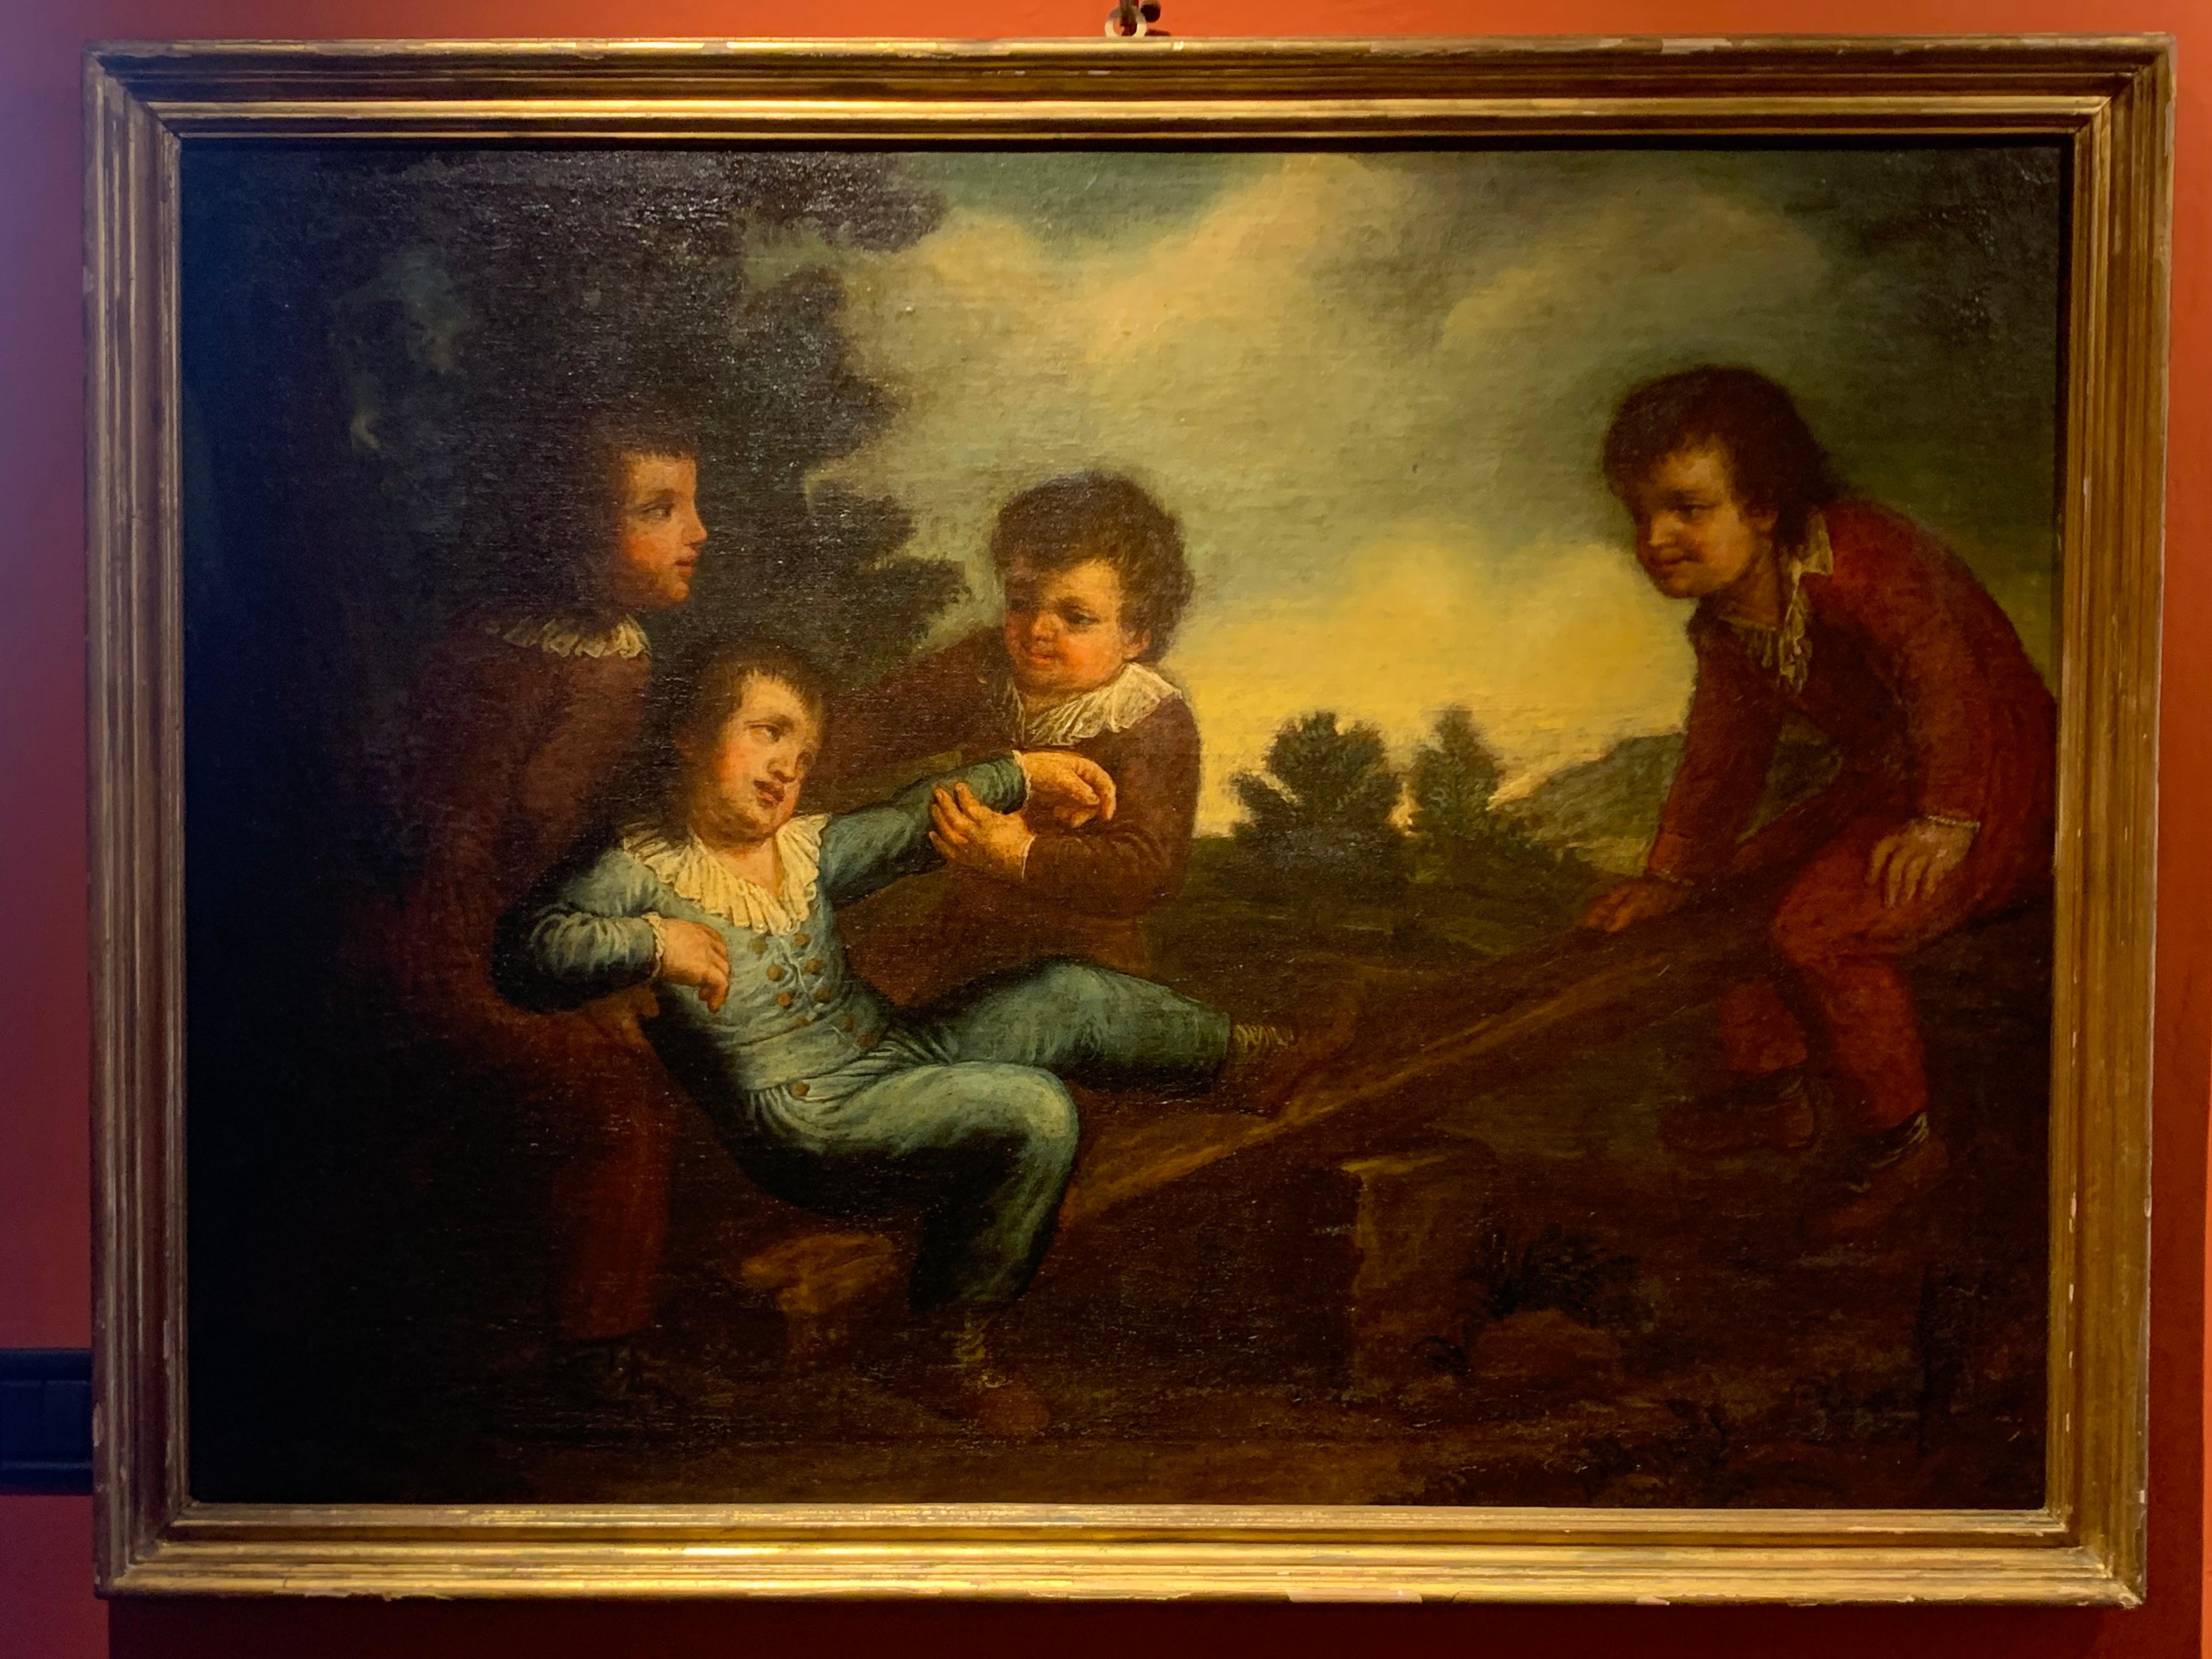 Unknown Landscape Painting - Rococo painting with frame by 18th-century Venetian school oil on canvas 